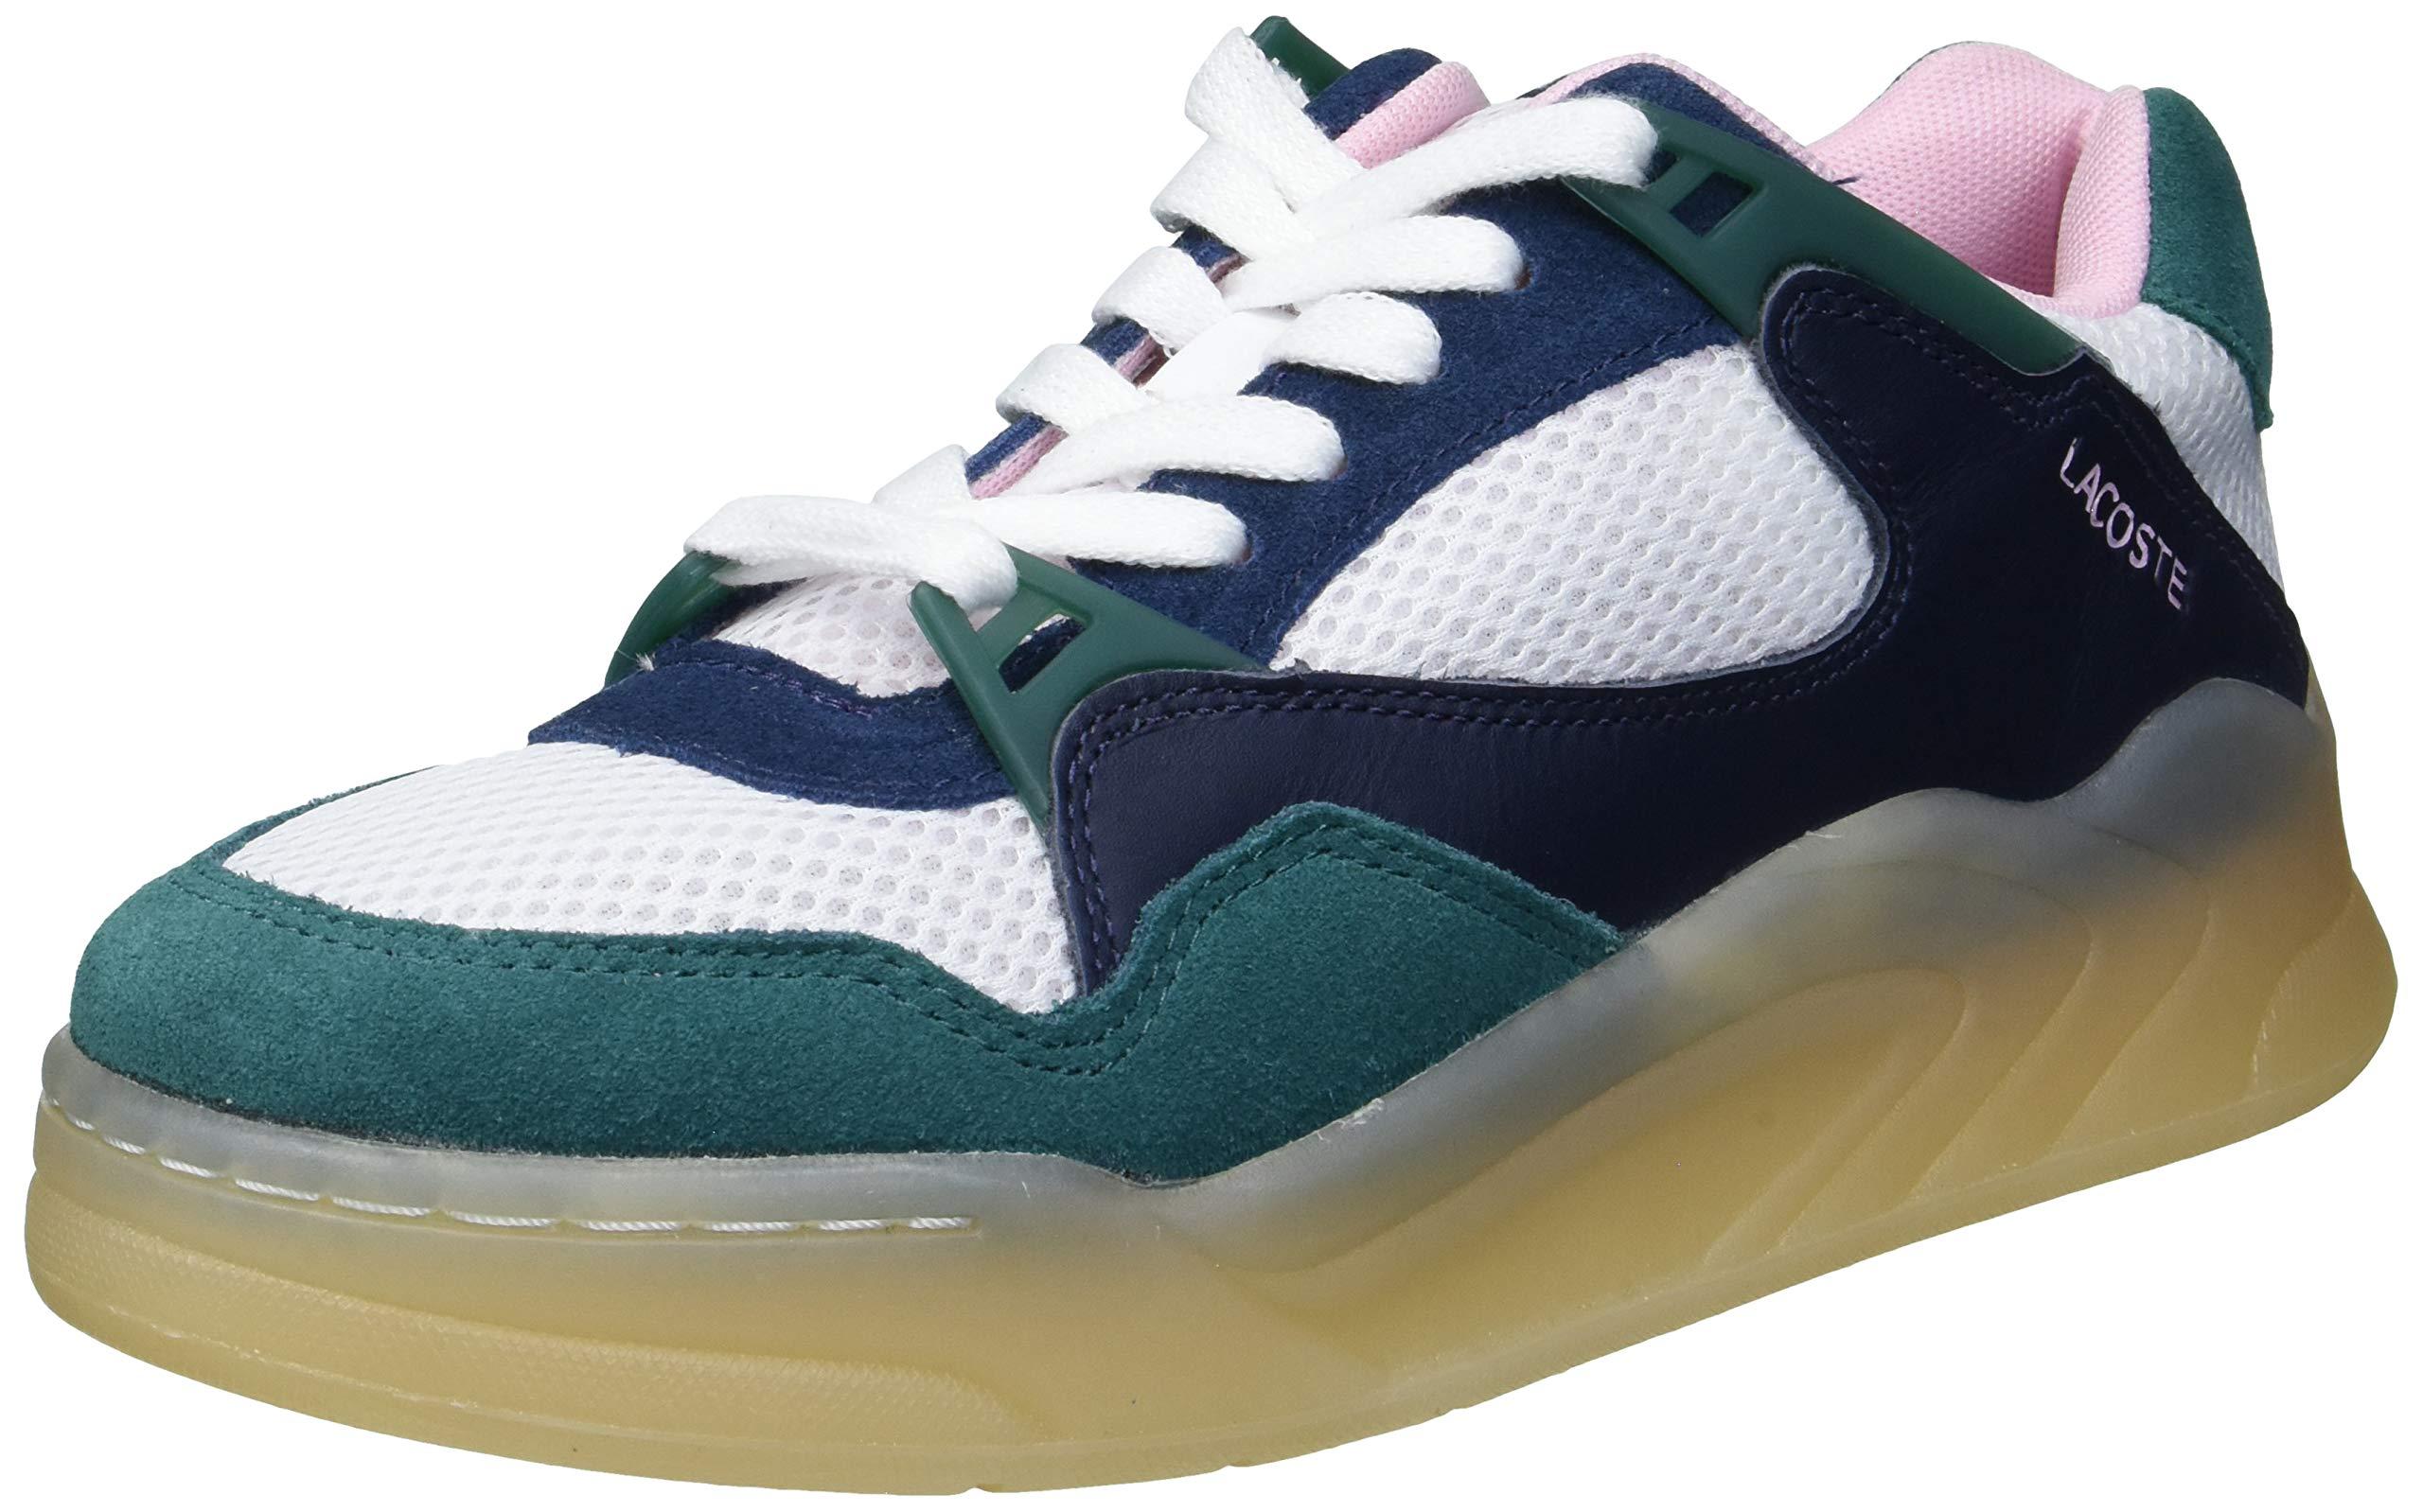 Lacoste Leather Court Slam Sneaker in White/Navy (Blue) - Save 38% - Lyst